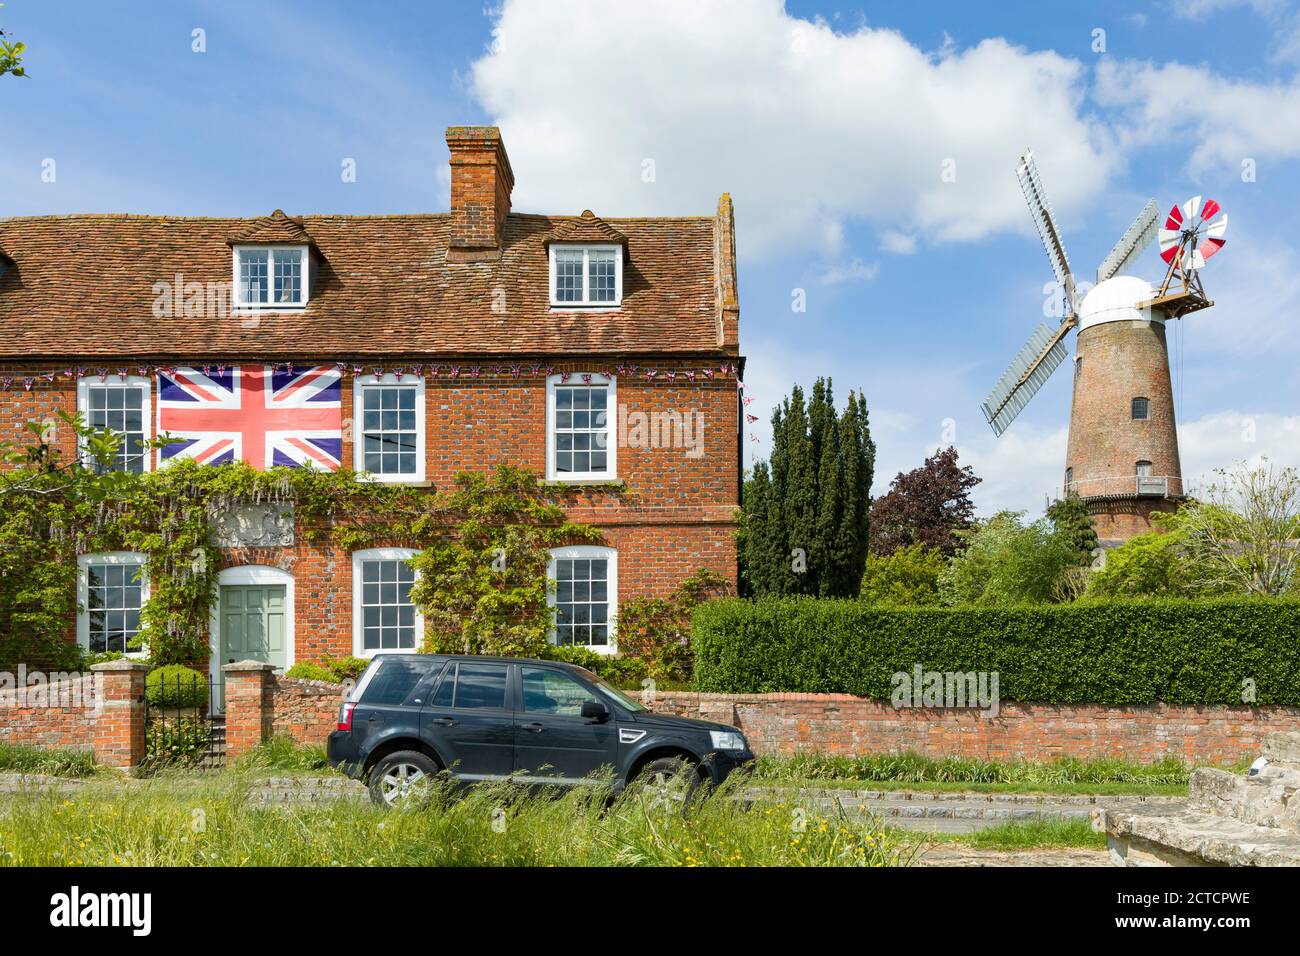 QUAINTON, UK - May 15, 2020. UK village scene in Buckinghamshire, with village green, British flag on a house and working windmill Stock Photo